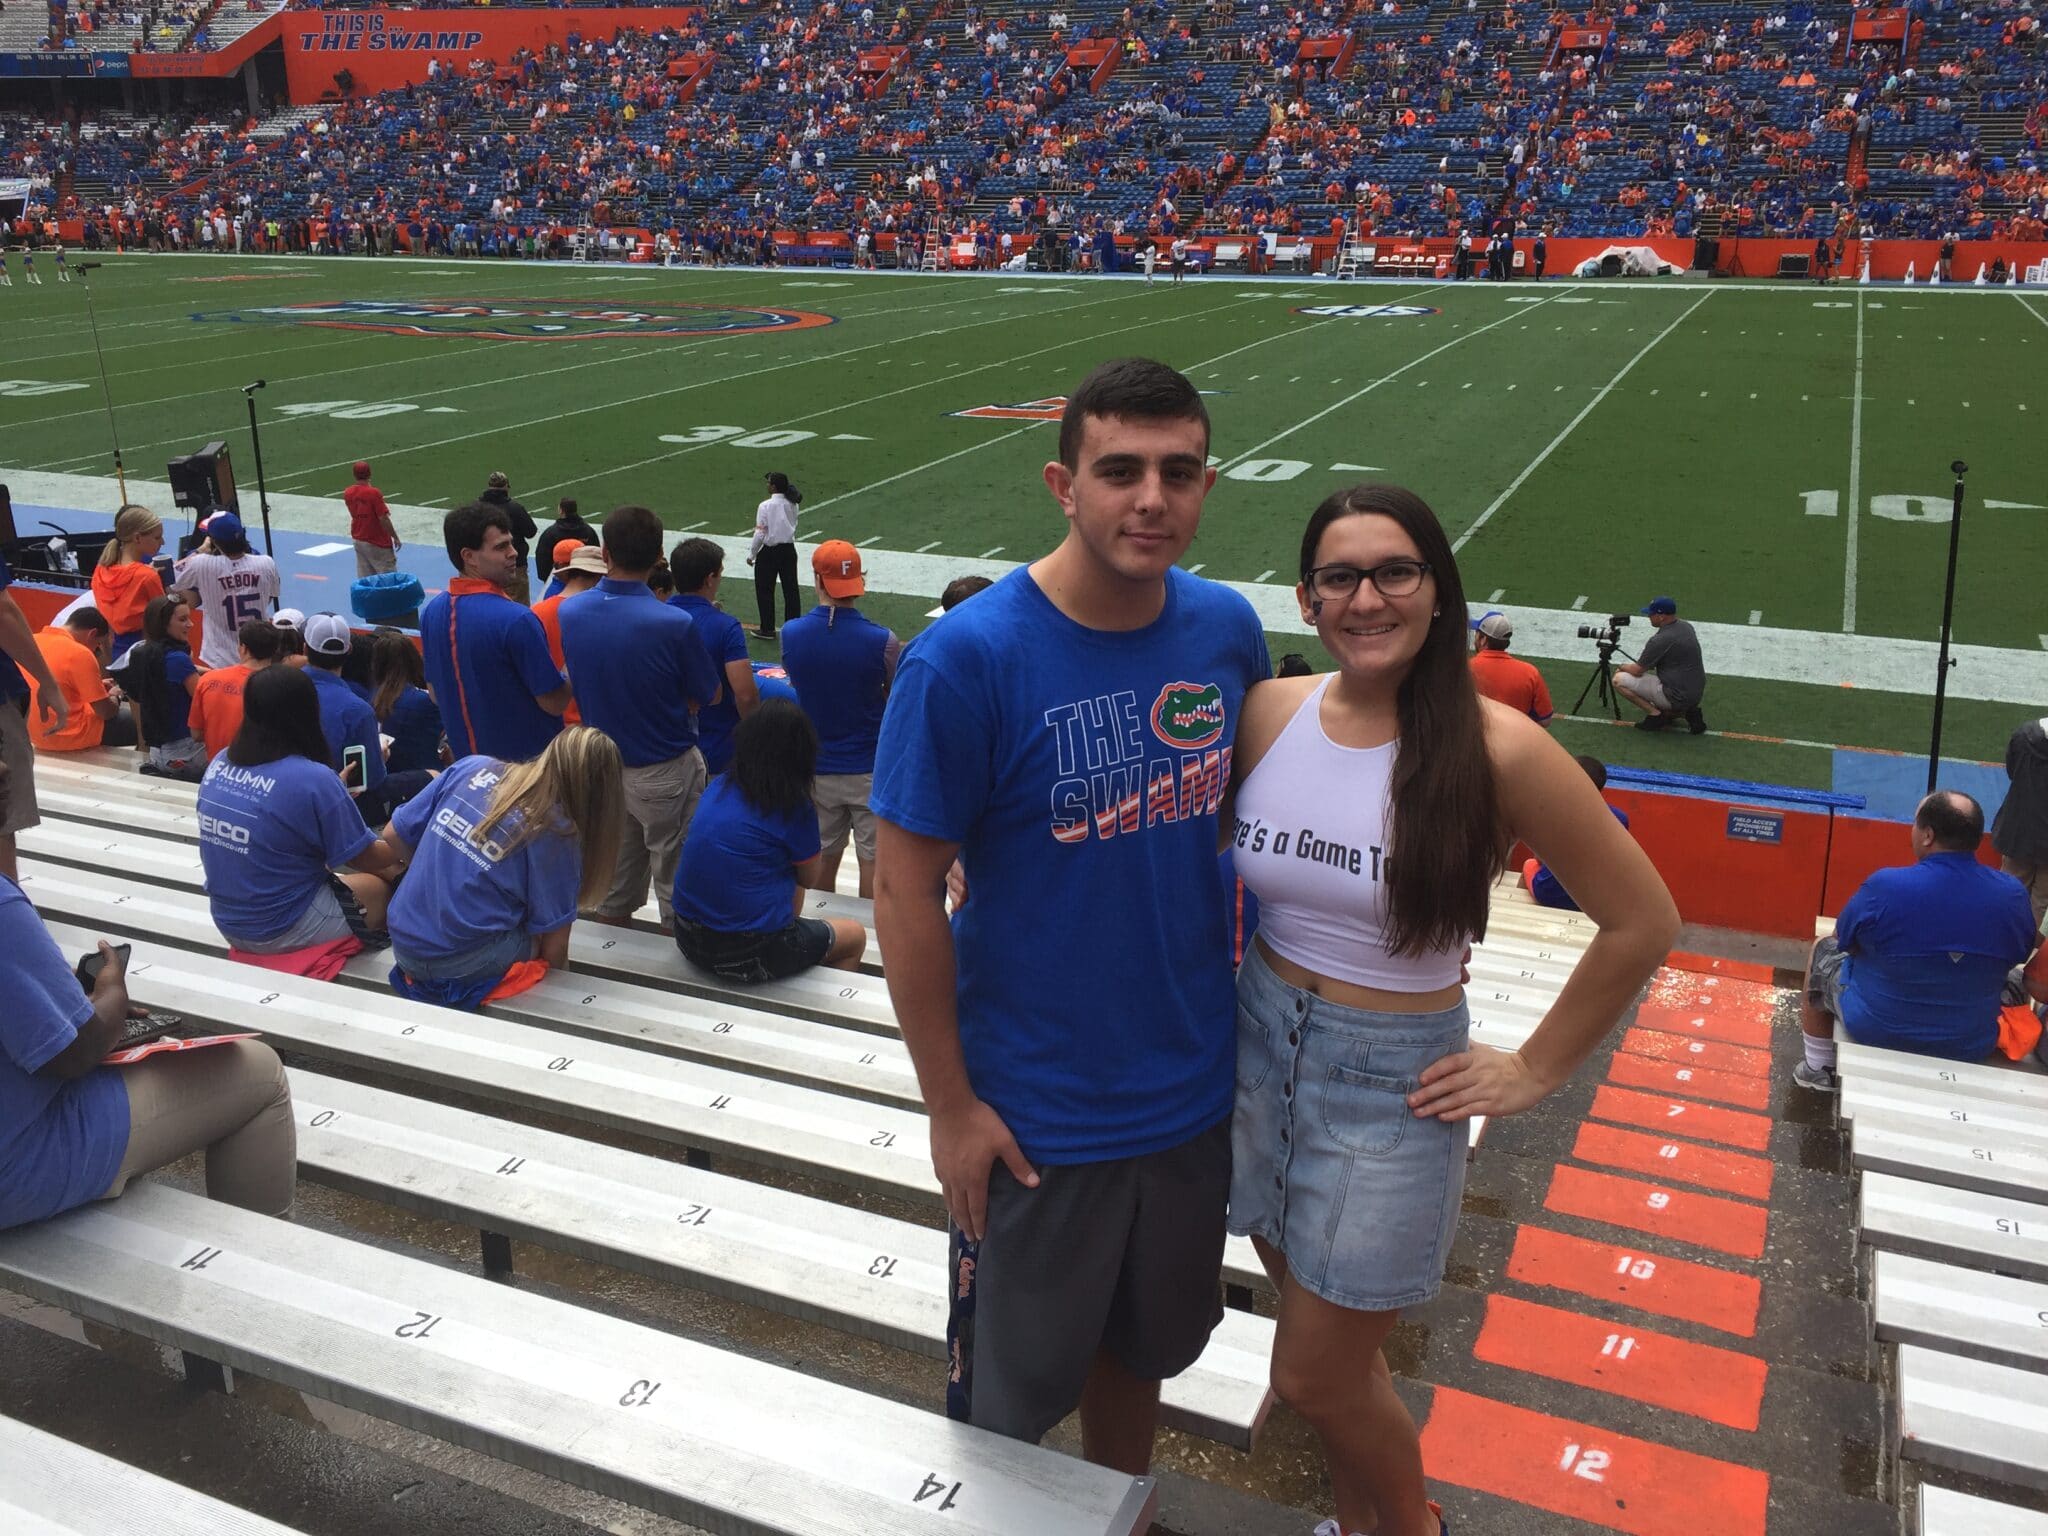 couple posing in The Swamp at U of F football game